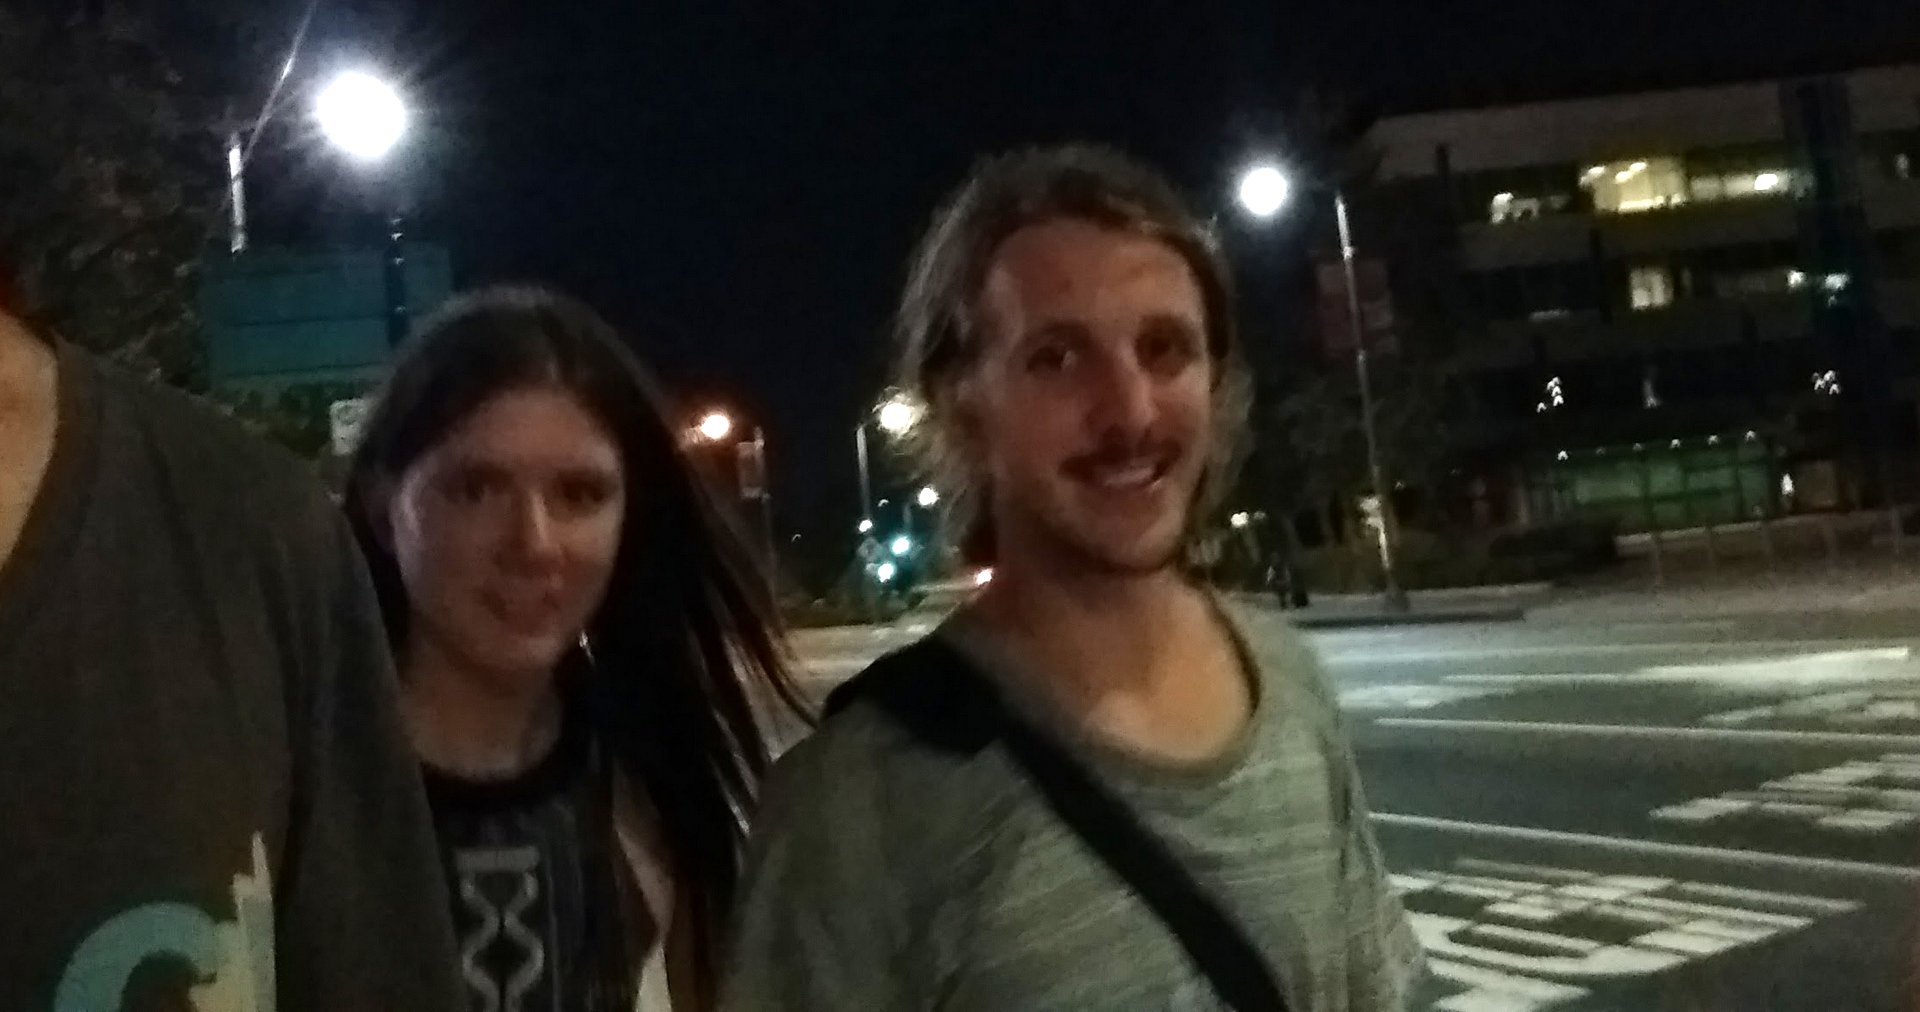 Two people walking down the street at night.